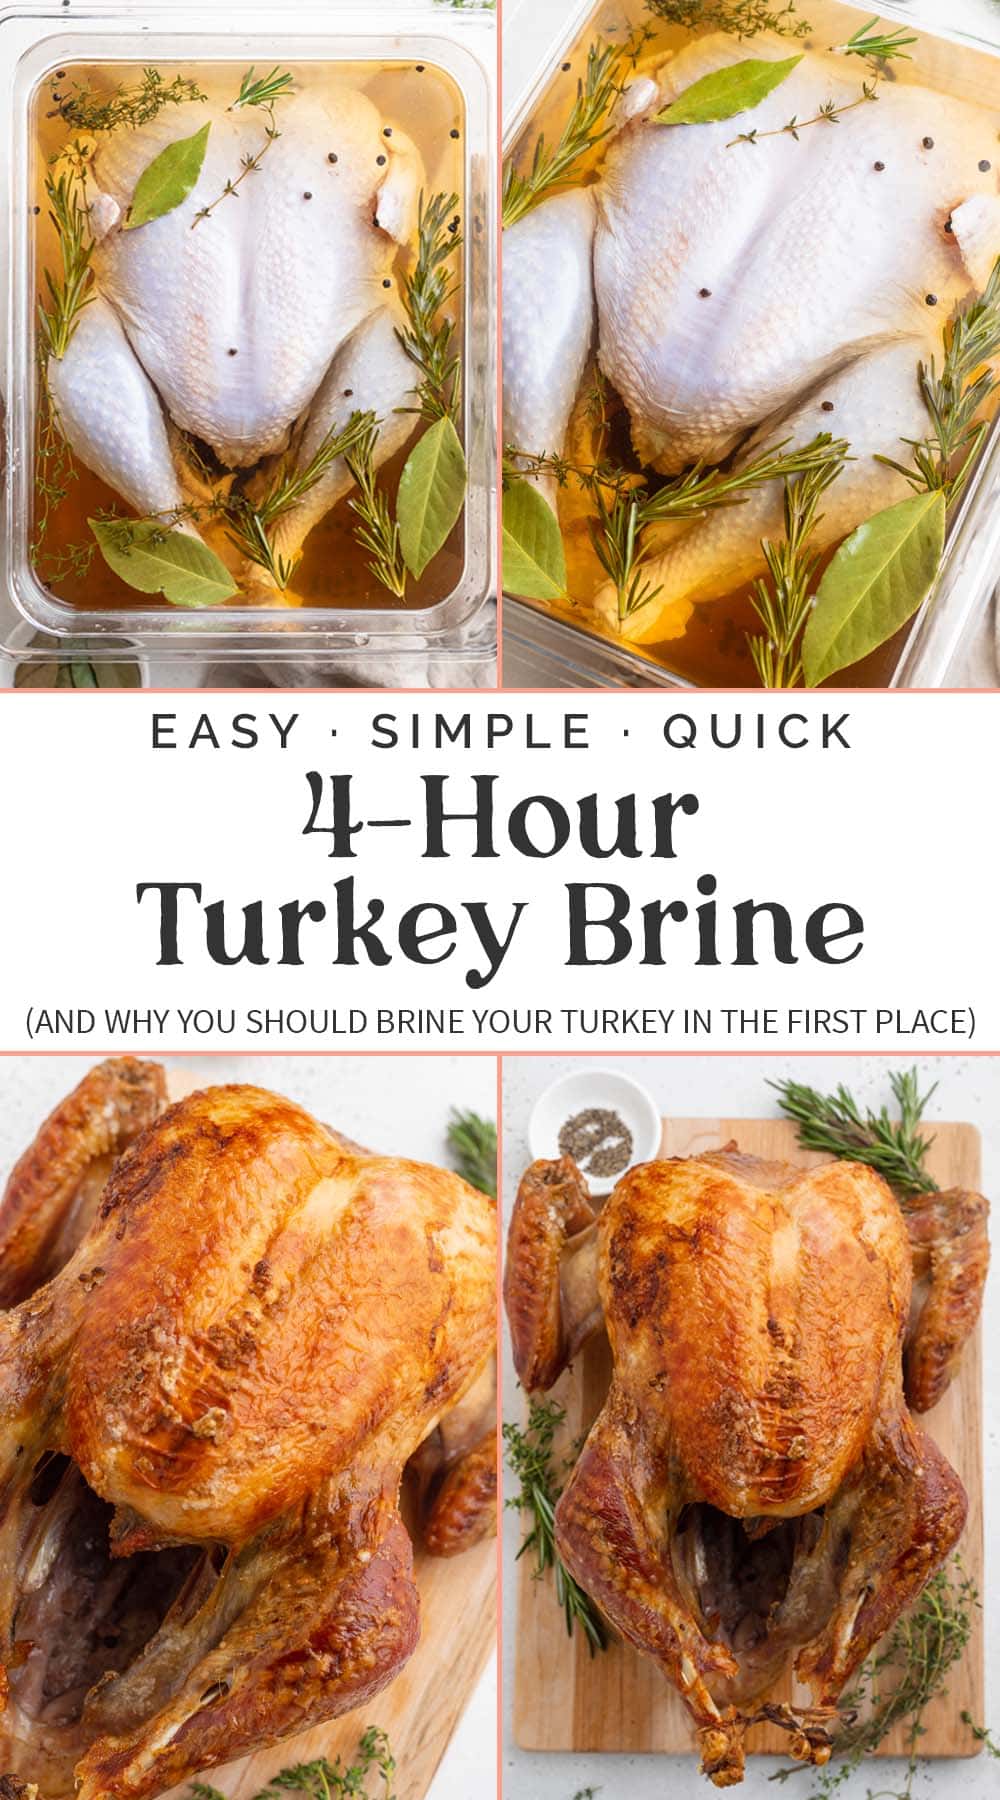 https://40aprons.com/wp-content/uploads/2022/10/quick-turkey-brine-pin-before-after.jpg